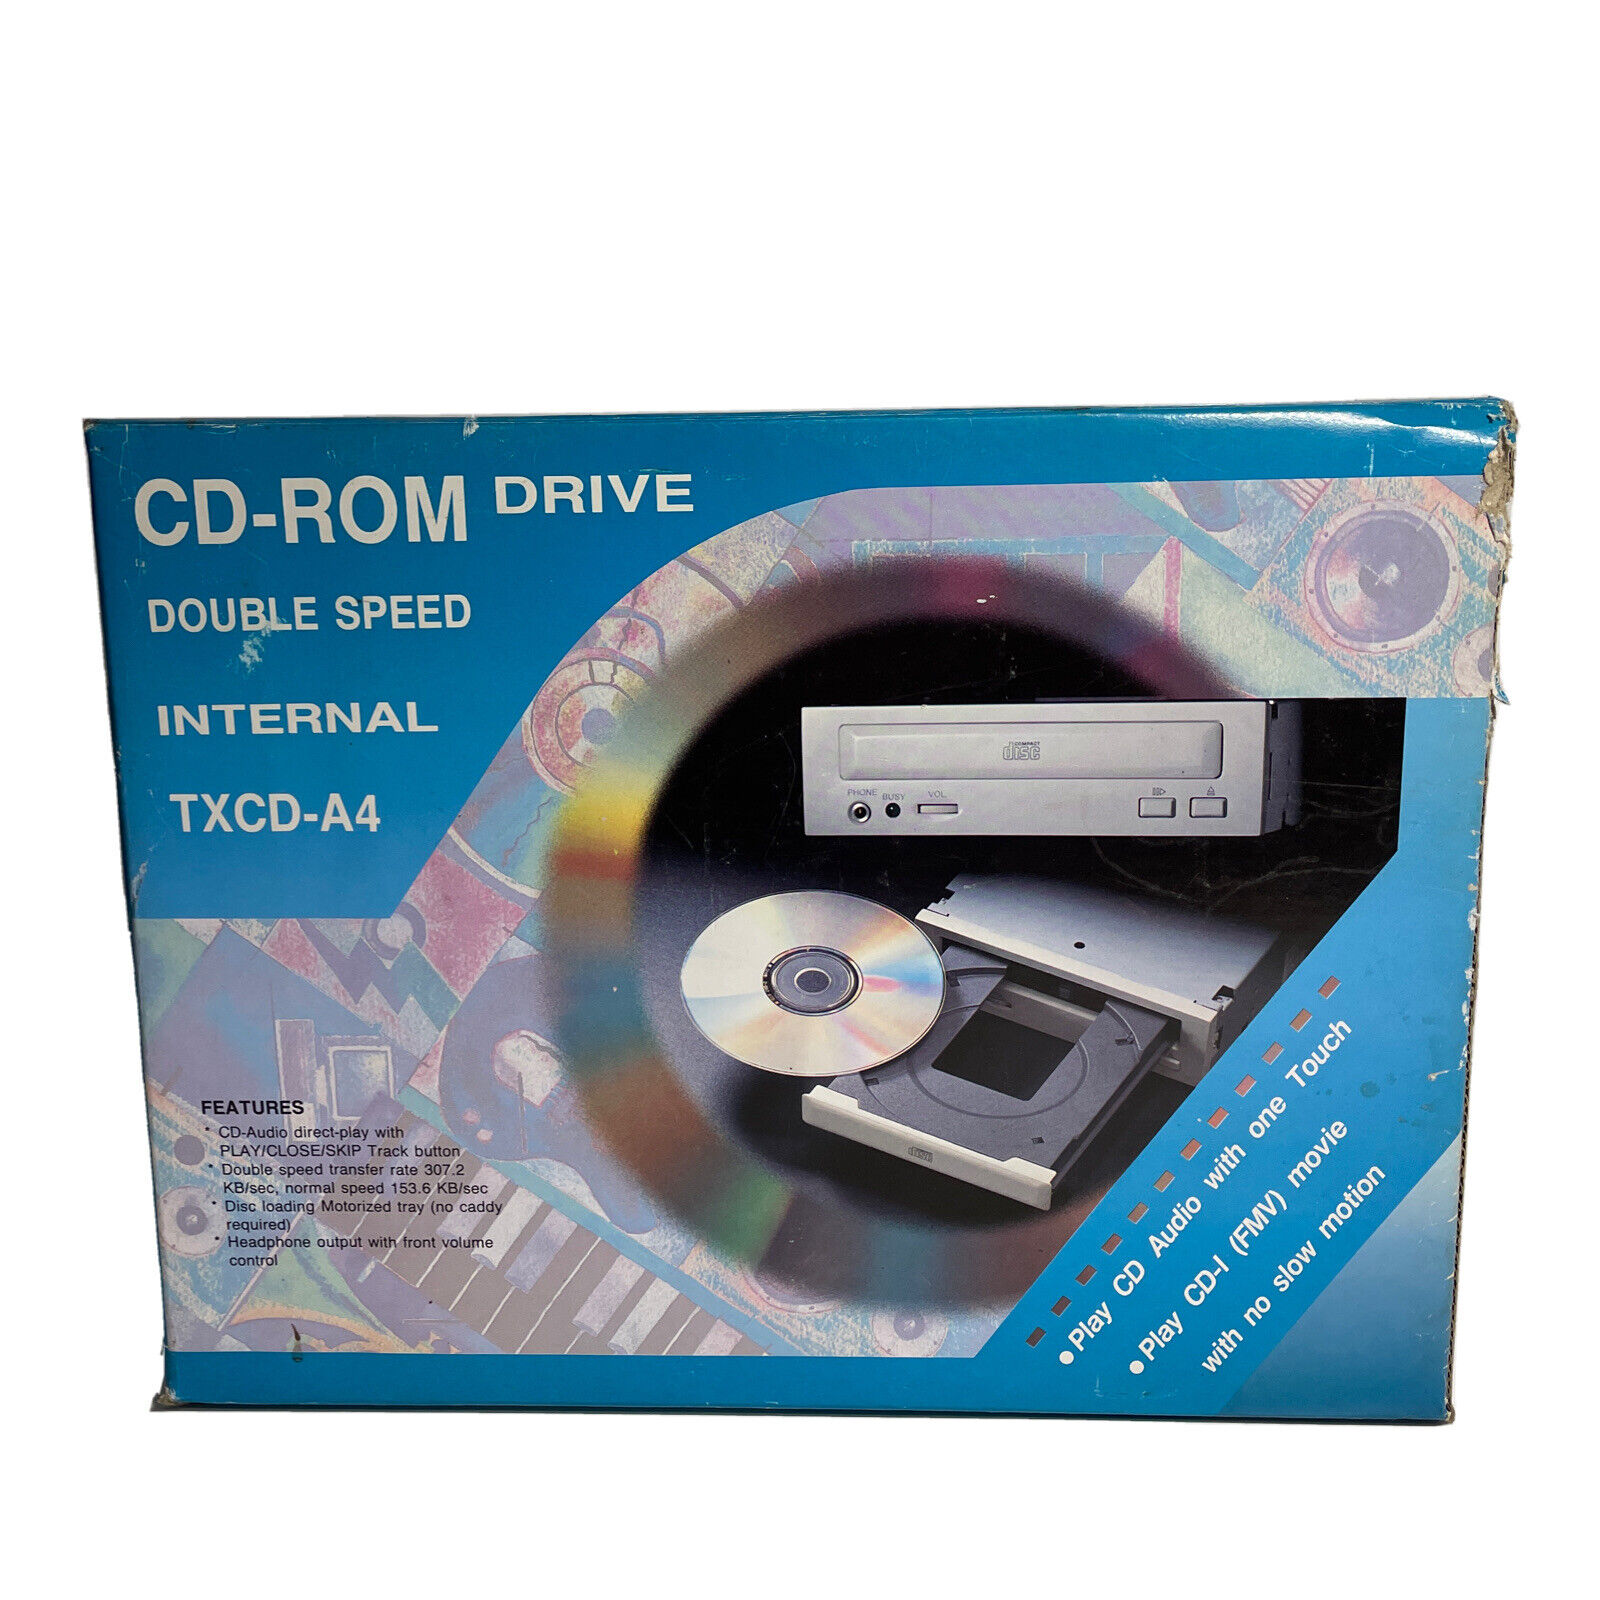 OLD VINTAGE CD ROM DRIVE DOUBLE SPEED TXCD-A4 new sealed